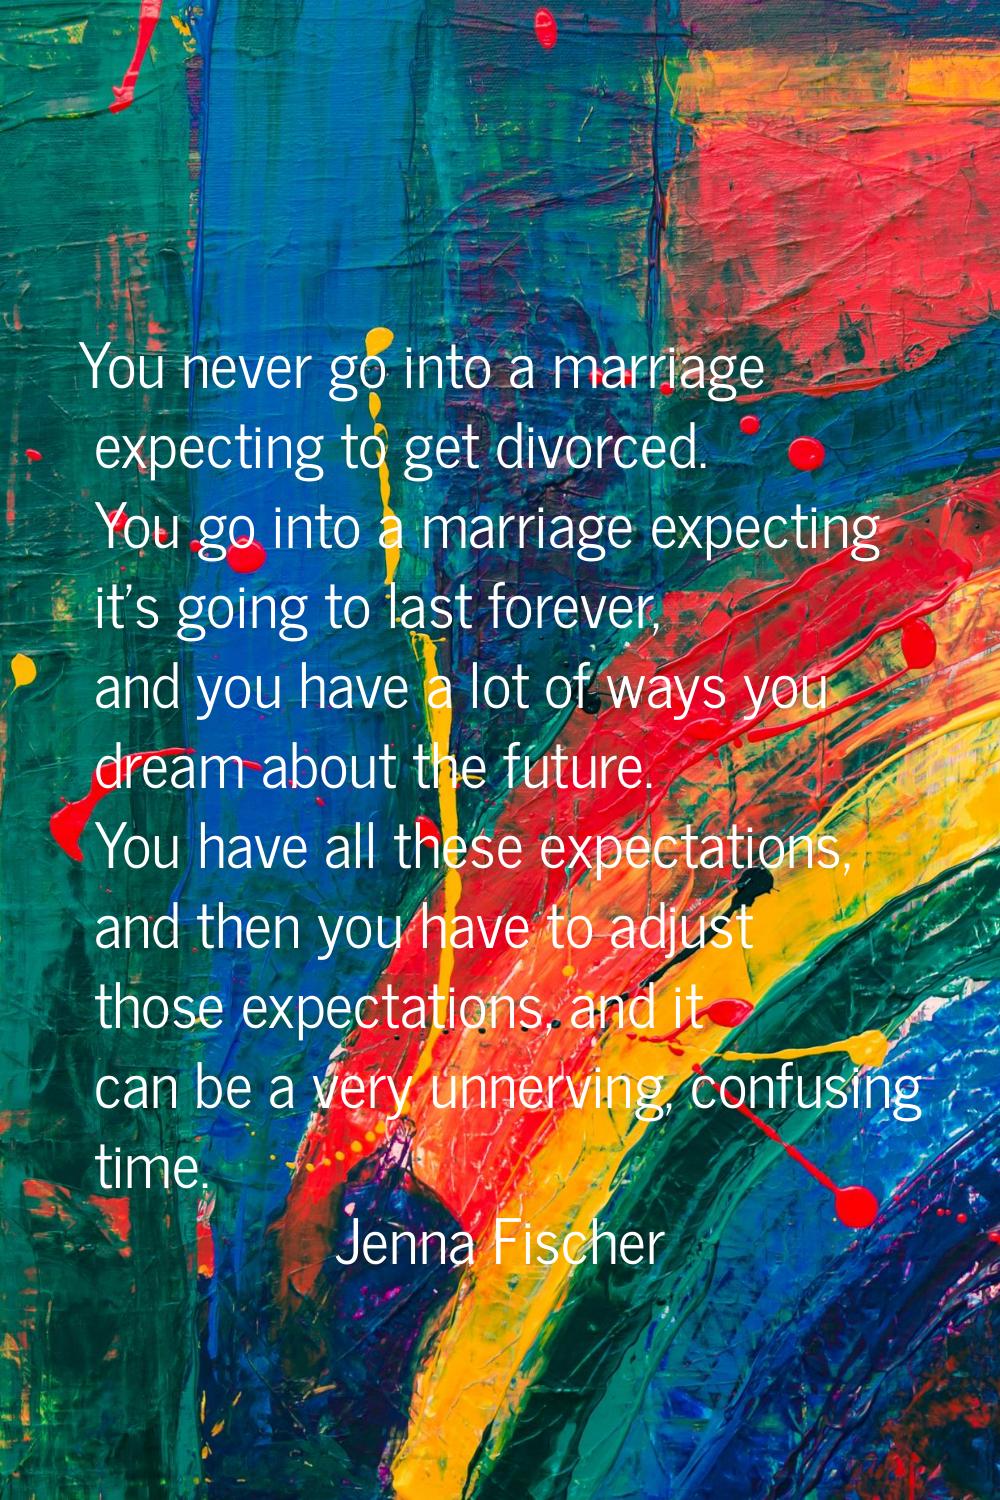 You never go into a marriage expecting to get divorced. You go into a marriage expecting it's going